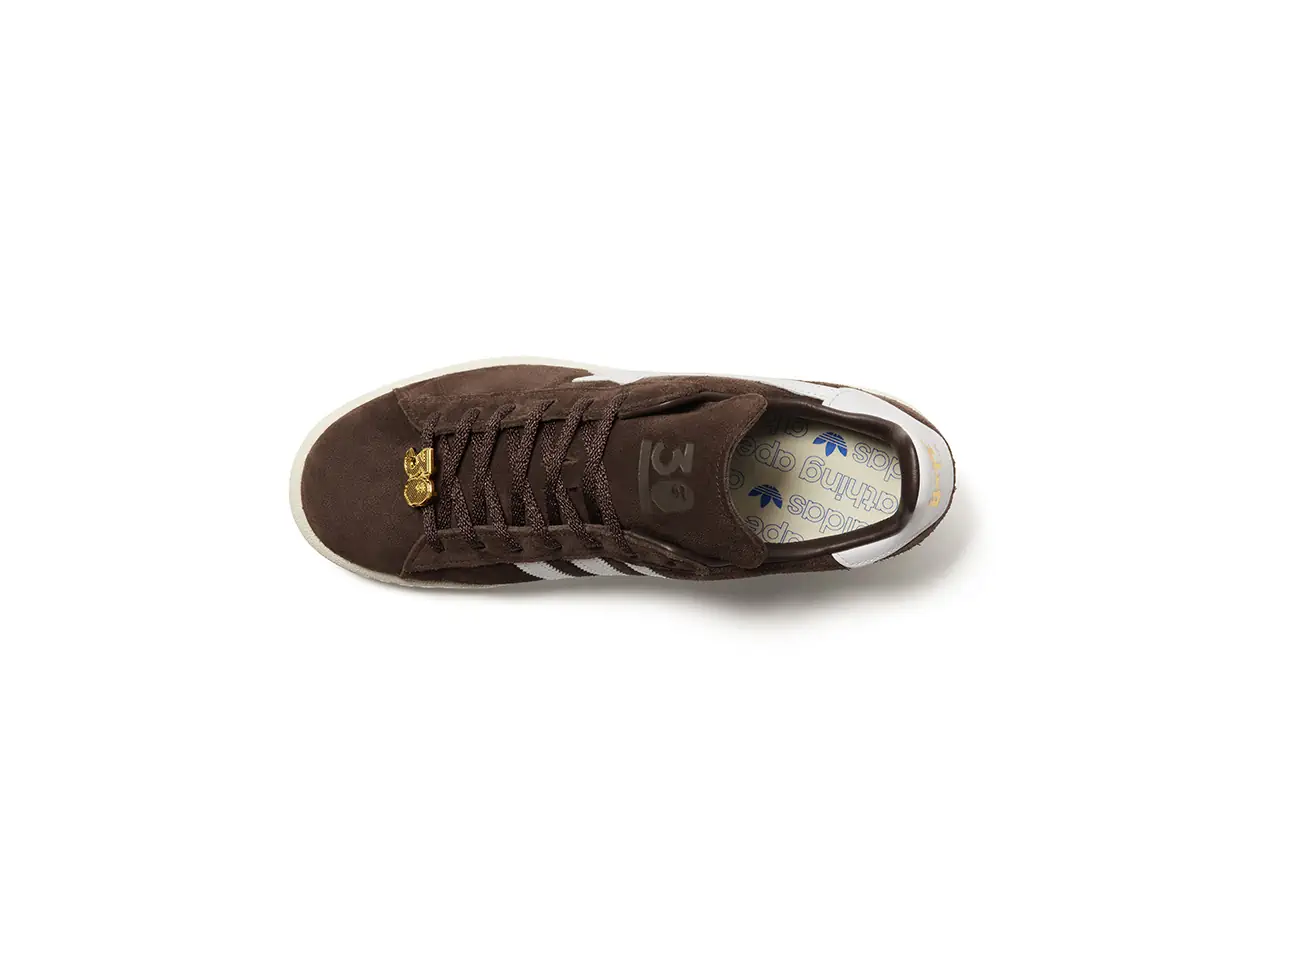 adidas Originals x BAPE®: Celebrating BAPE®'s 30 years with the iconic Campus 80s sneaker